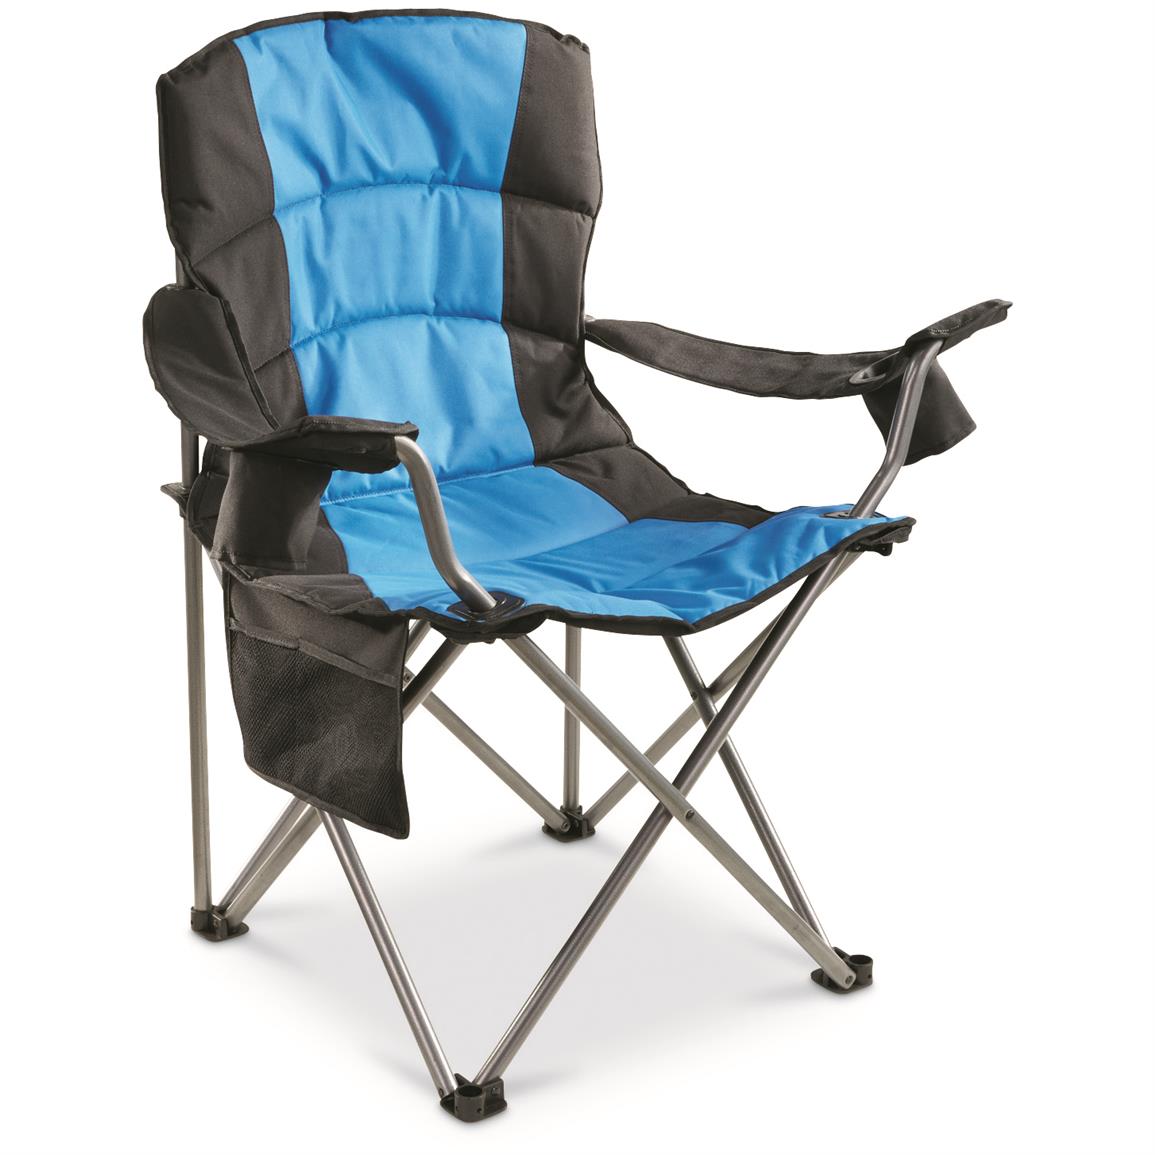 Guide Gear Oversized King Camp Chair, 500 lb. Capacity